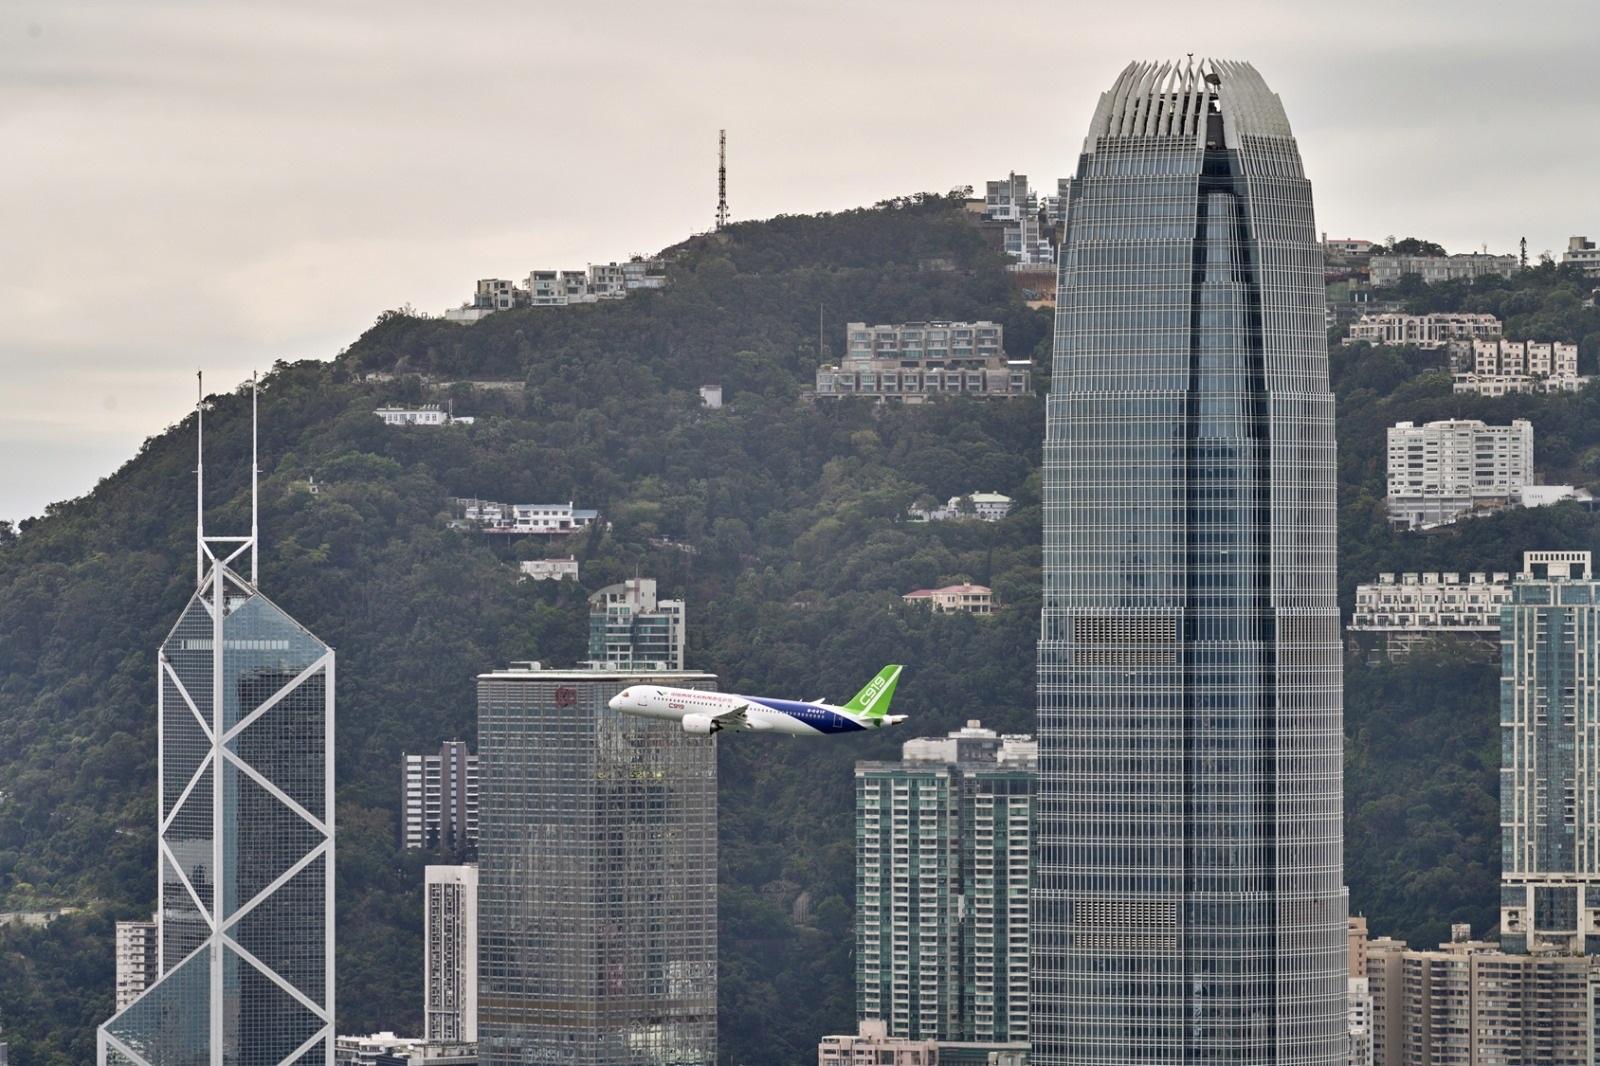 The flight demonstration of home-grown aircraft C919 concluded successfully this morning (December 16). Photo shows the C919 aircraft flying over Victoria Harbour.